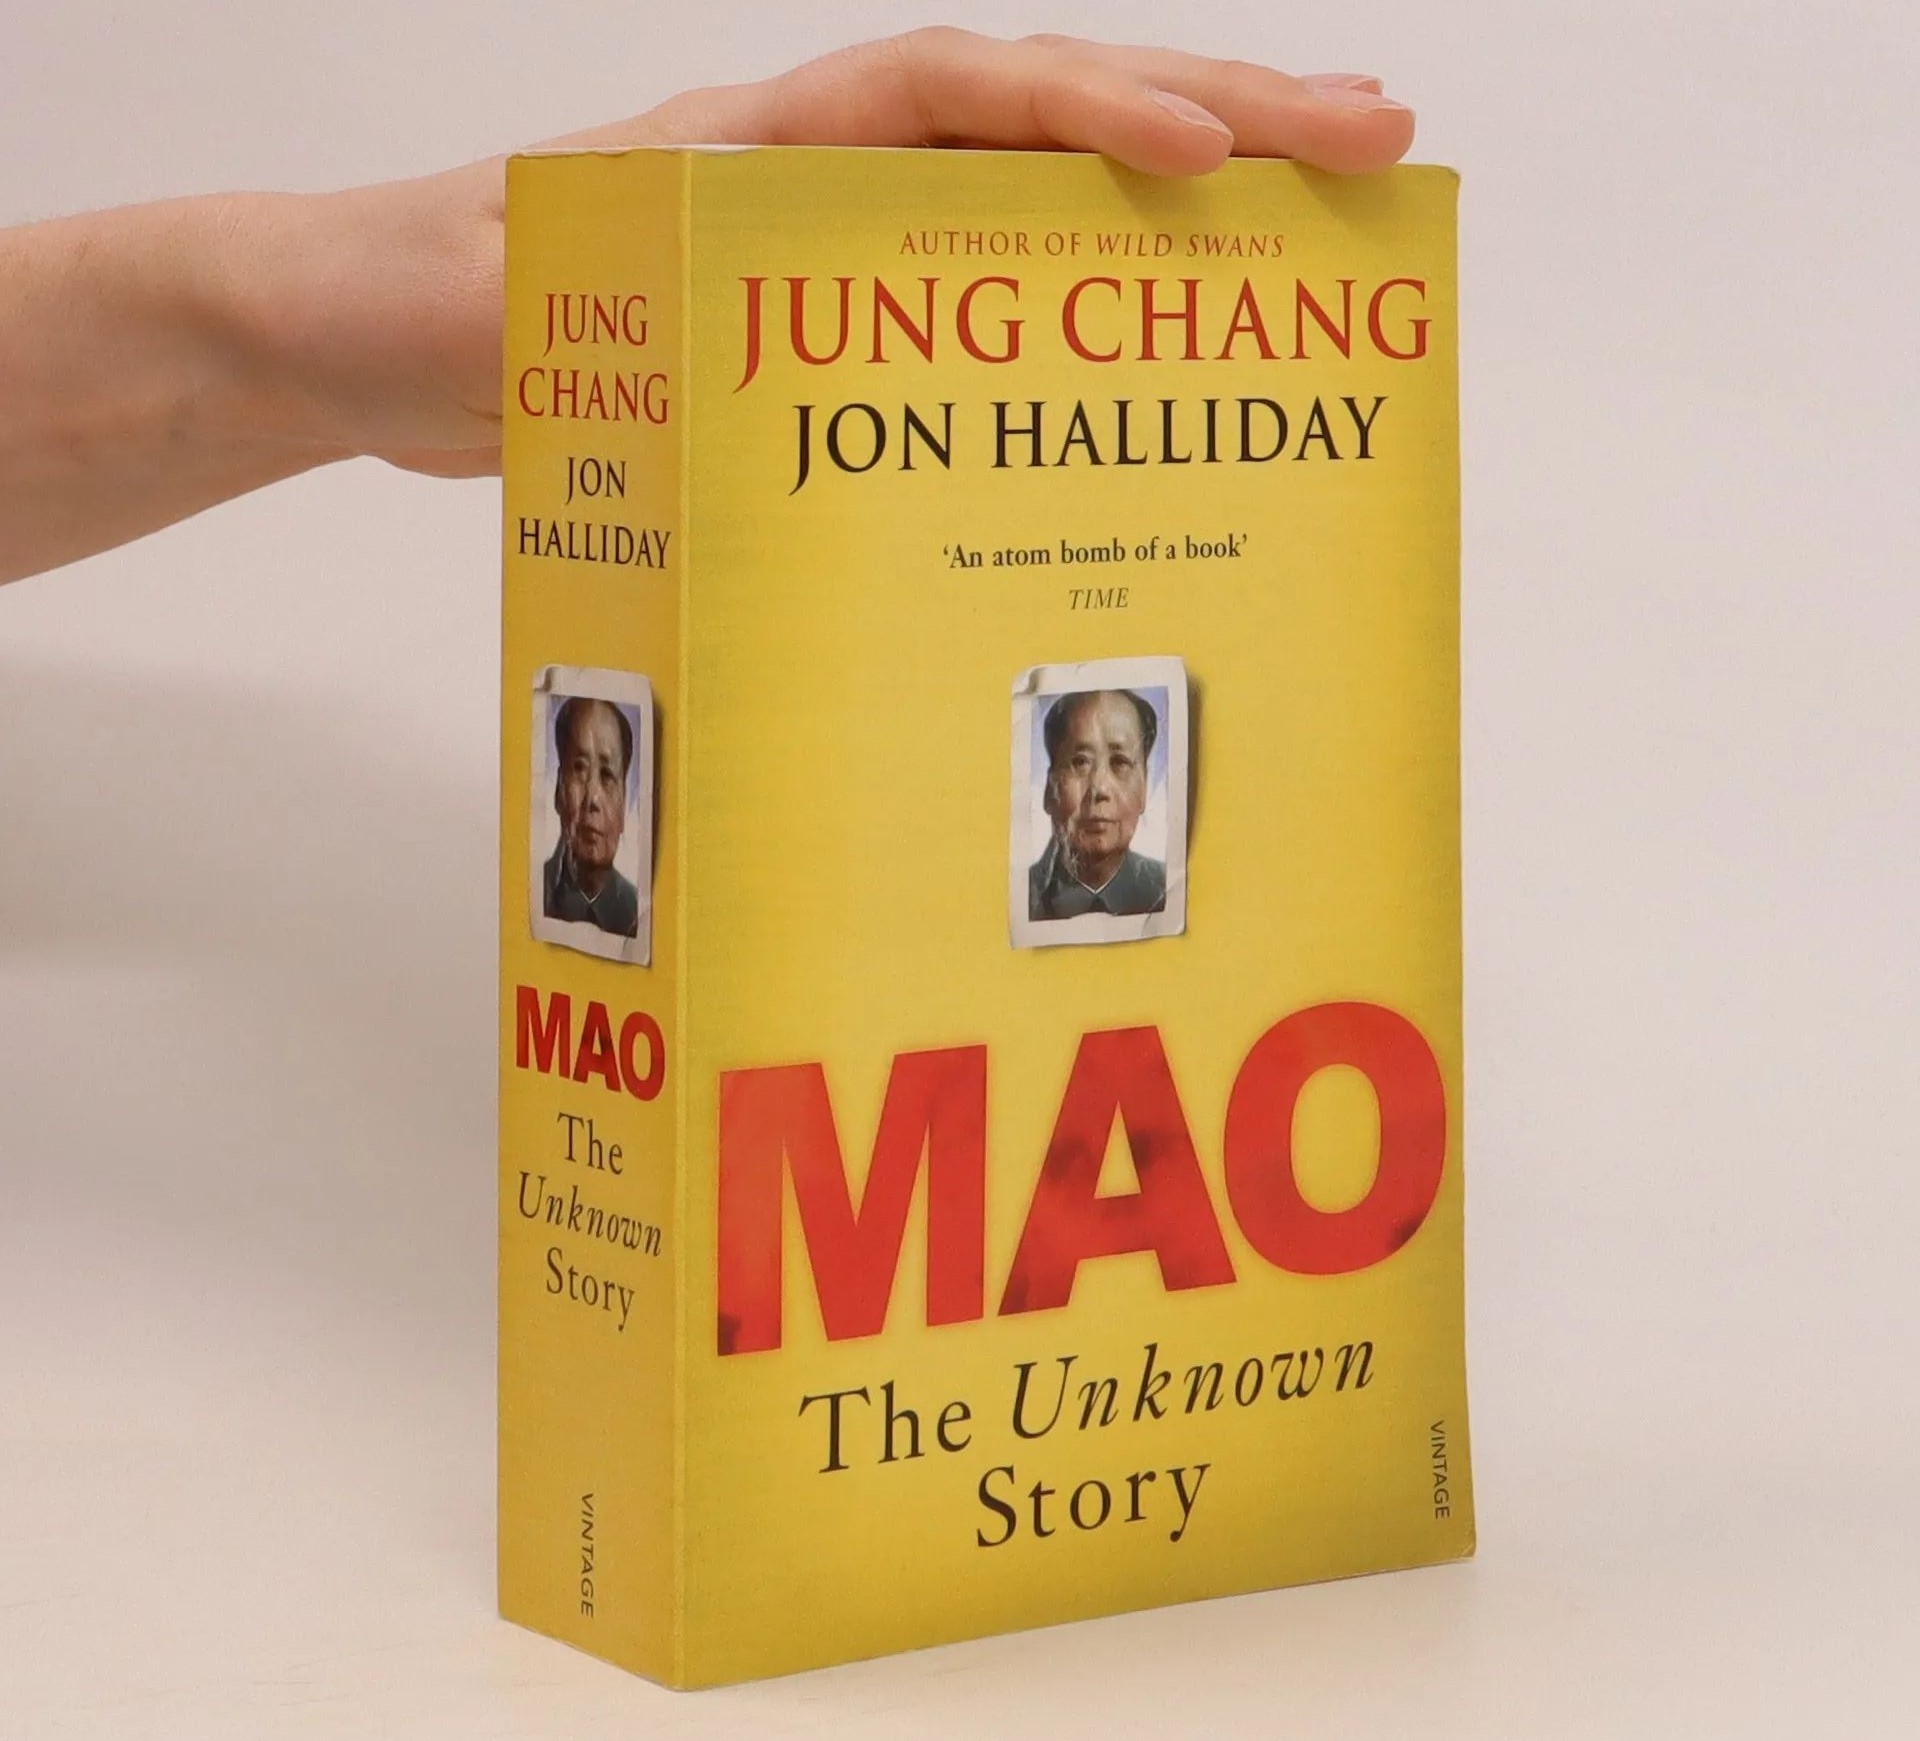 20-intriguing-facts-about-mao-the-unknown-story-jung-chang